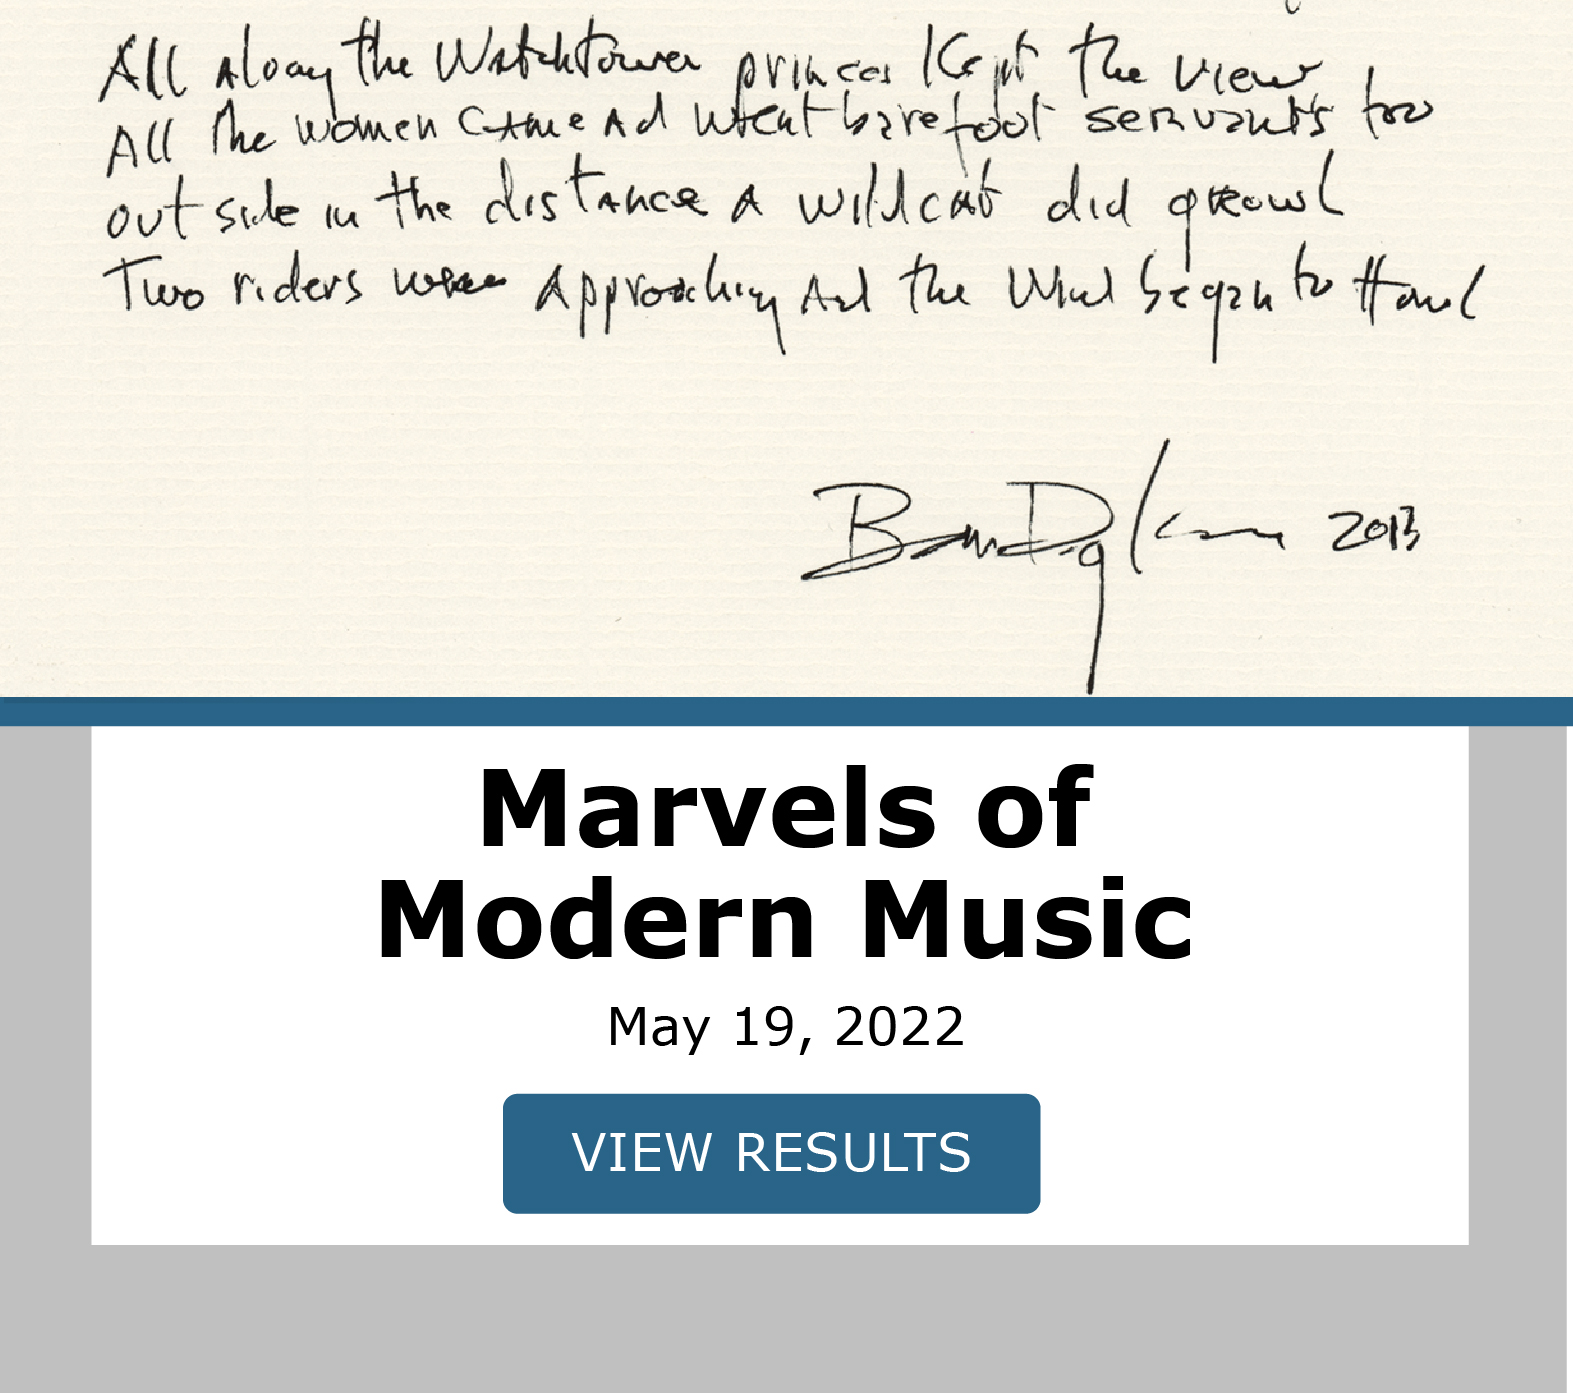 Marvels of Modern Music. Bidding closed May 19th. View Results!